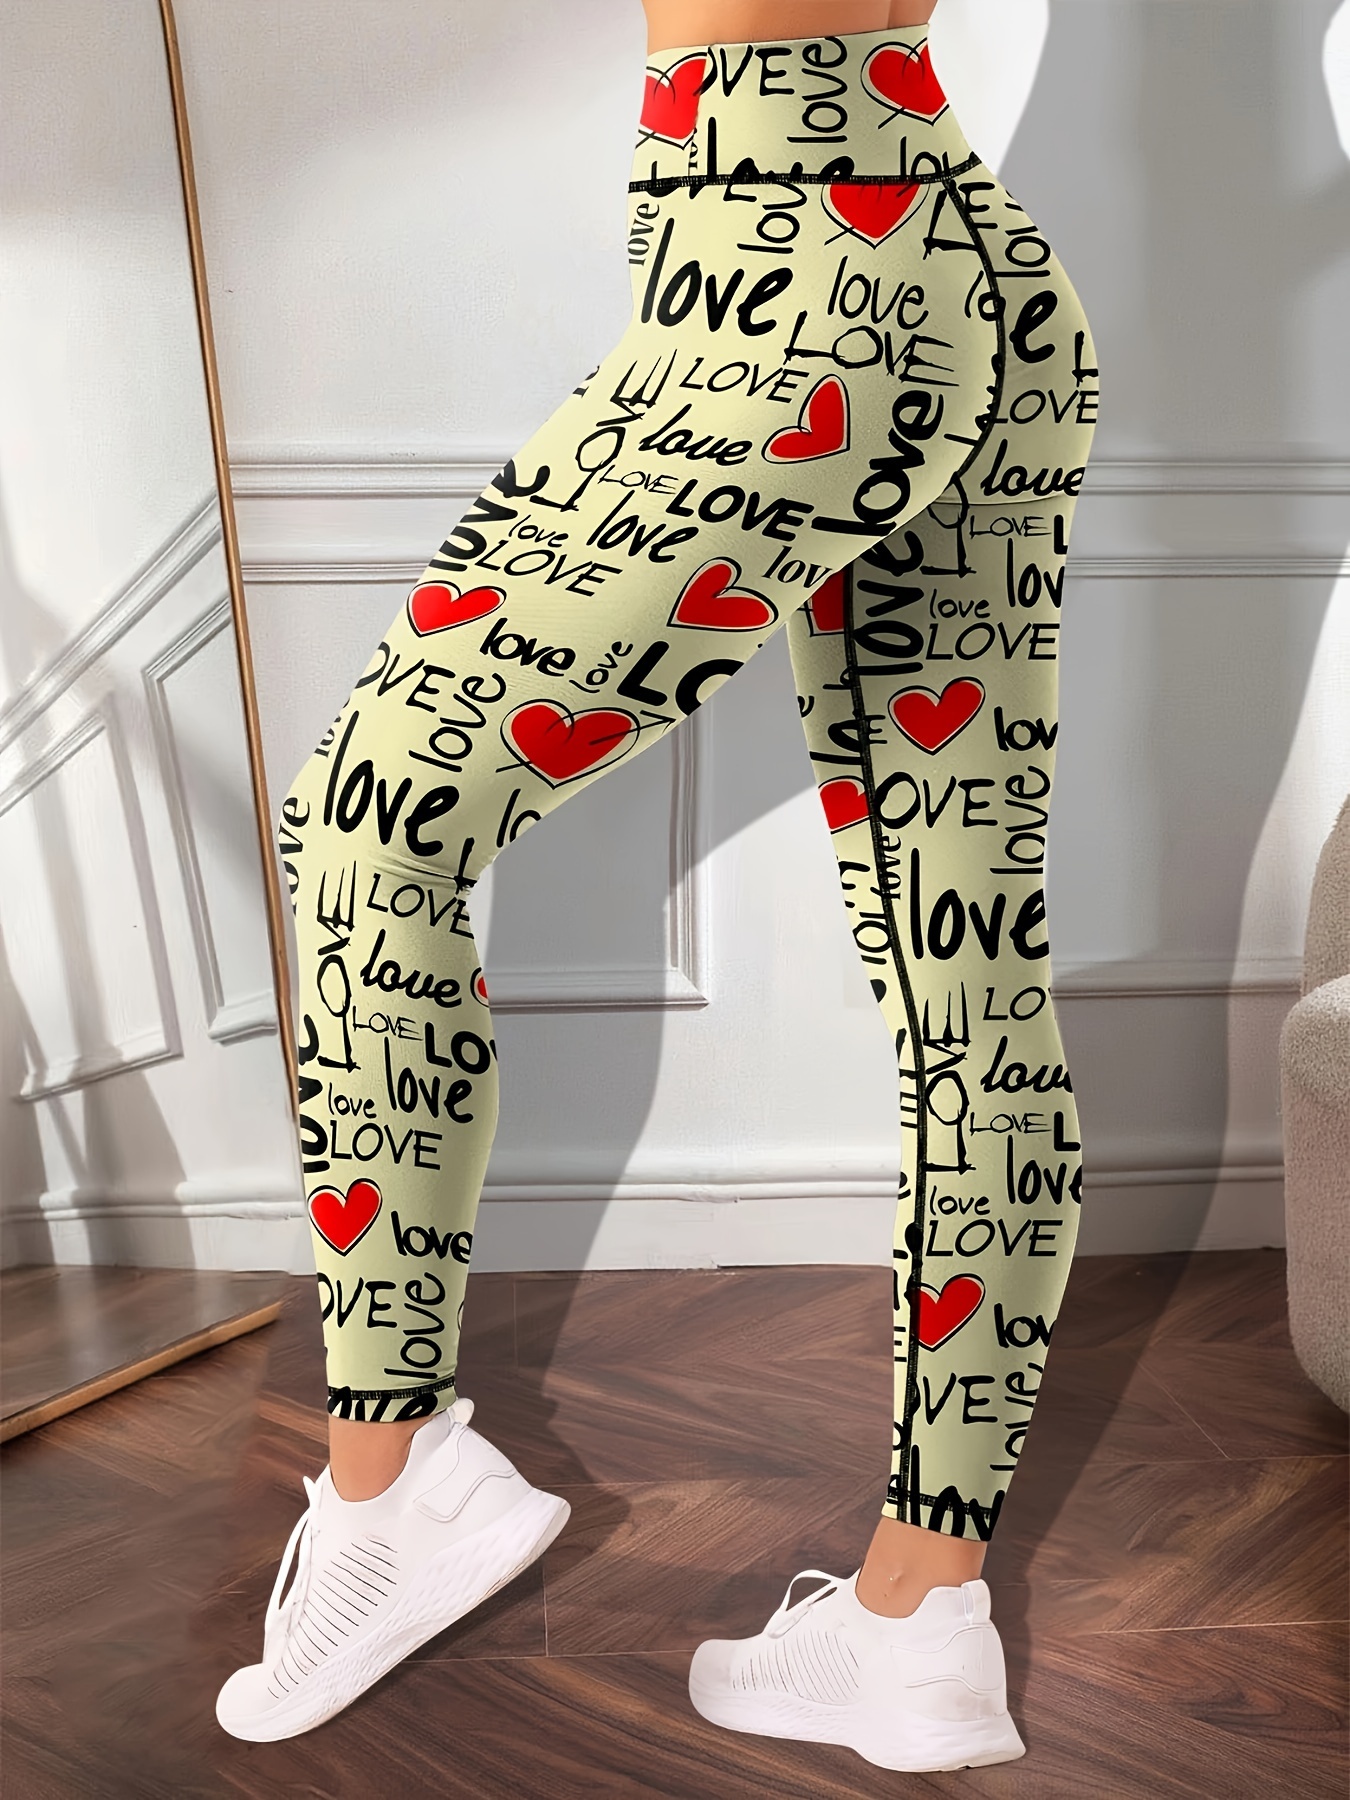 Xoxo Valentines Day, Cute Valentine design Leggings for Sale by ROJENABELL